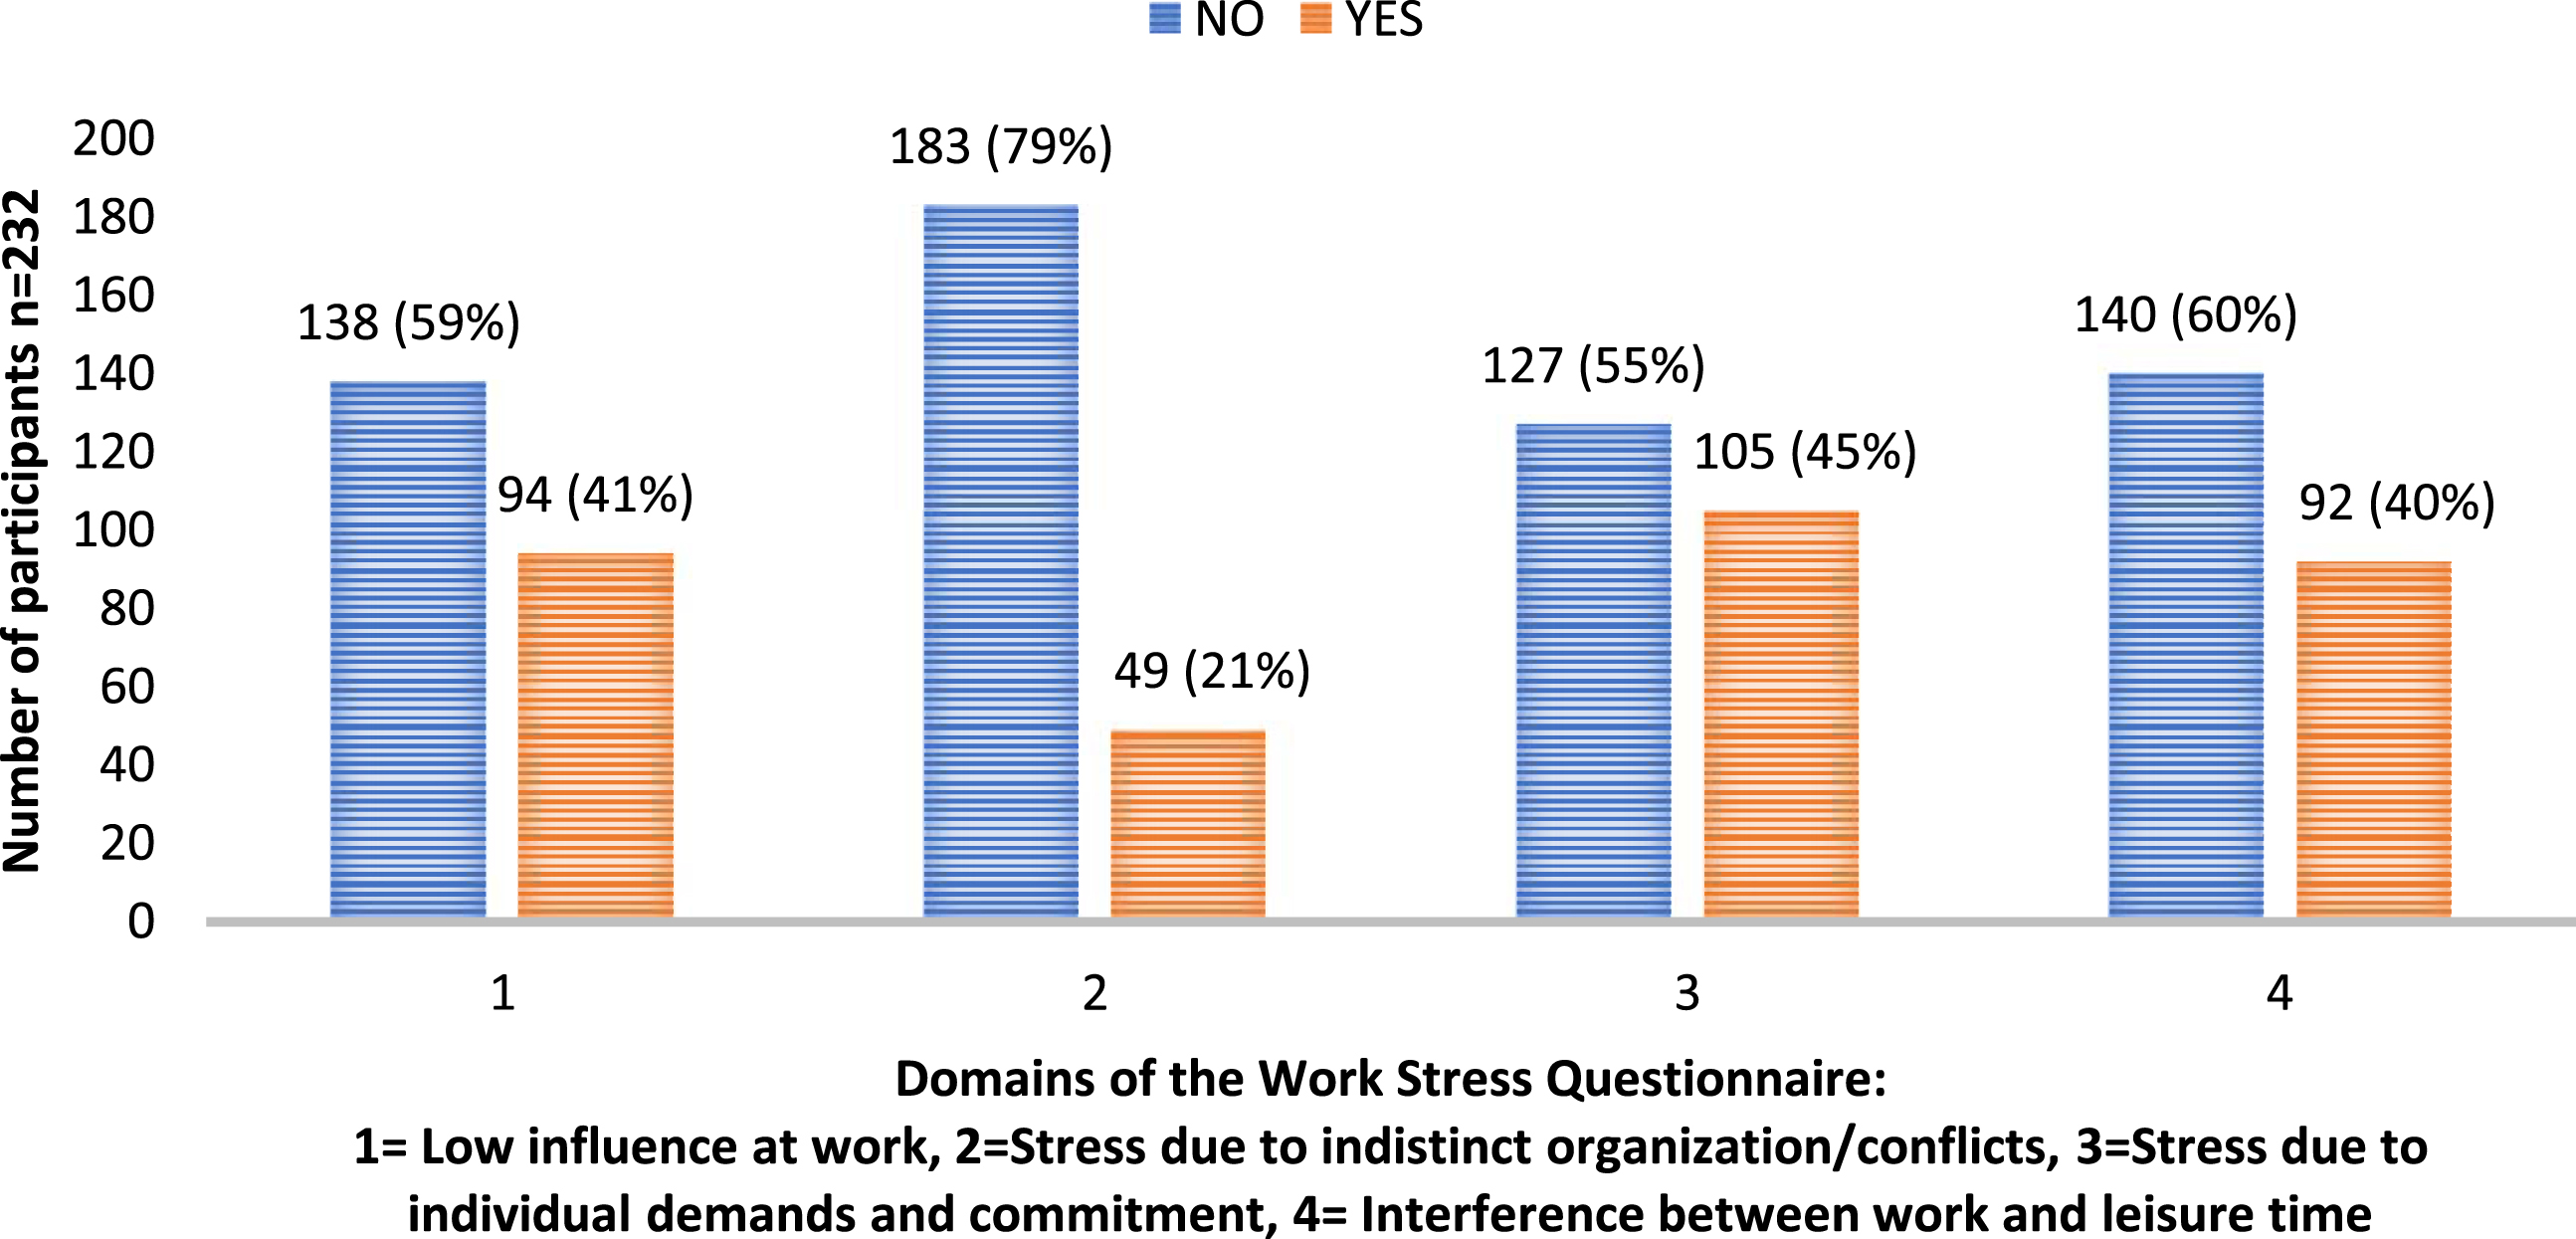 Perceived work-related stress among the study participants, measured using the Work Stress Questionnaire and dichotomised as “no” (median value of 1–2) or “yes” (median value of 3—4) for the respective domains. Total n = 232.